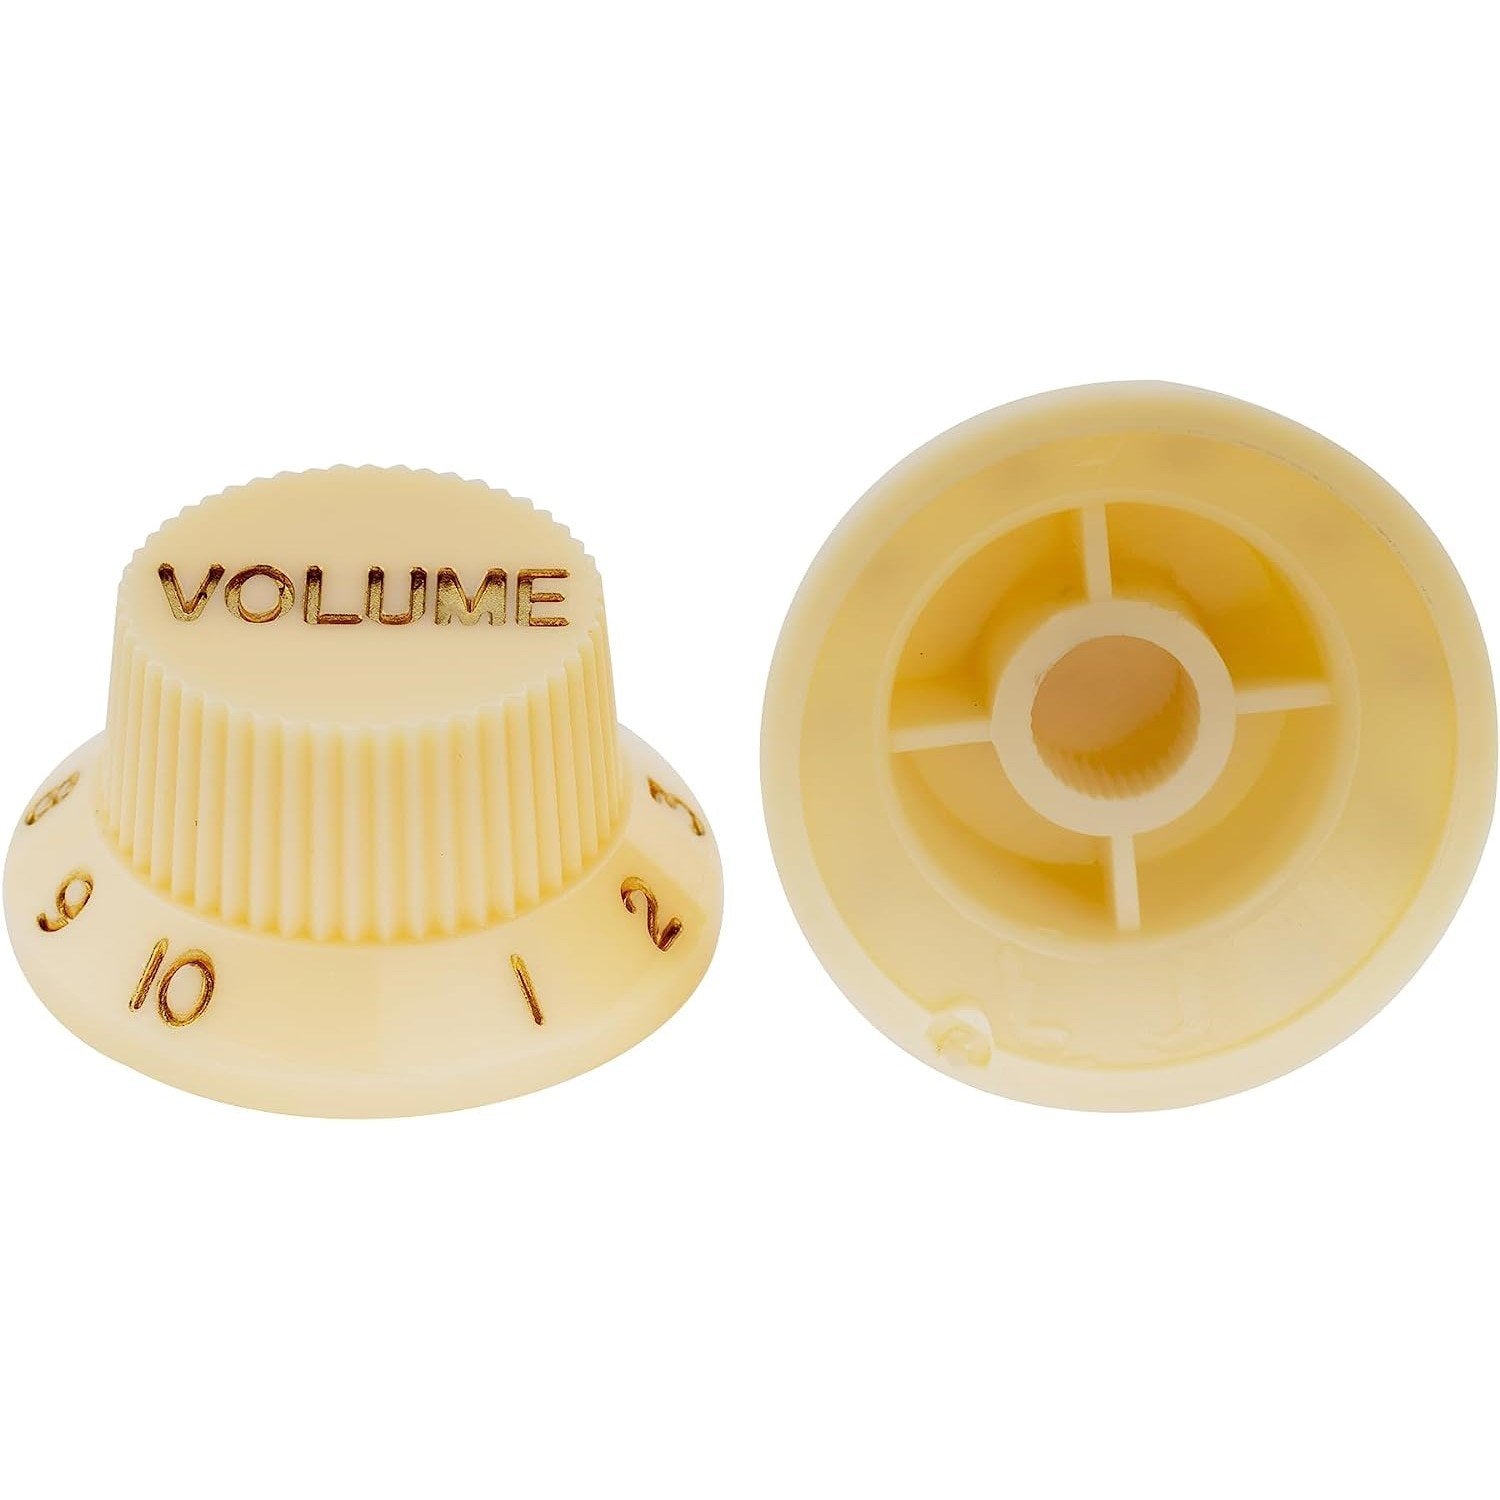 Metric Control Guitar Knobs for Strat